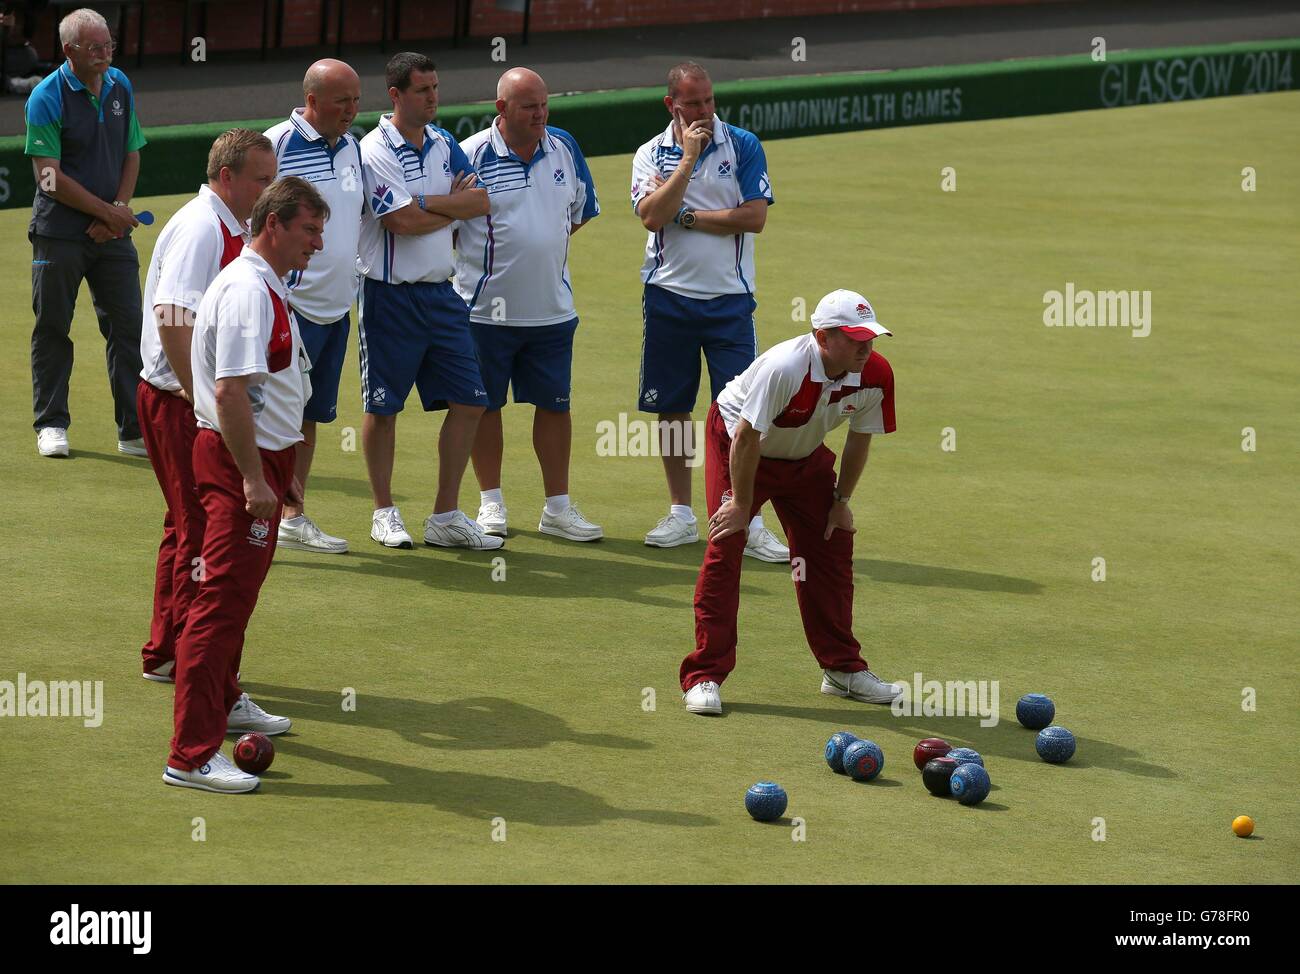 Scotland and England in the Men's Fours final at Kelvingrove Lawn Bowls Centre, during the 2014 Commonwealth Games in Glasgow. Stock Photo